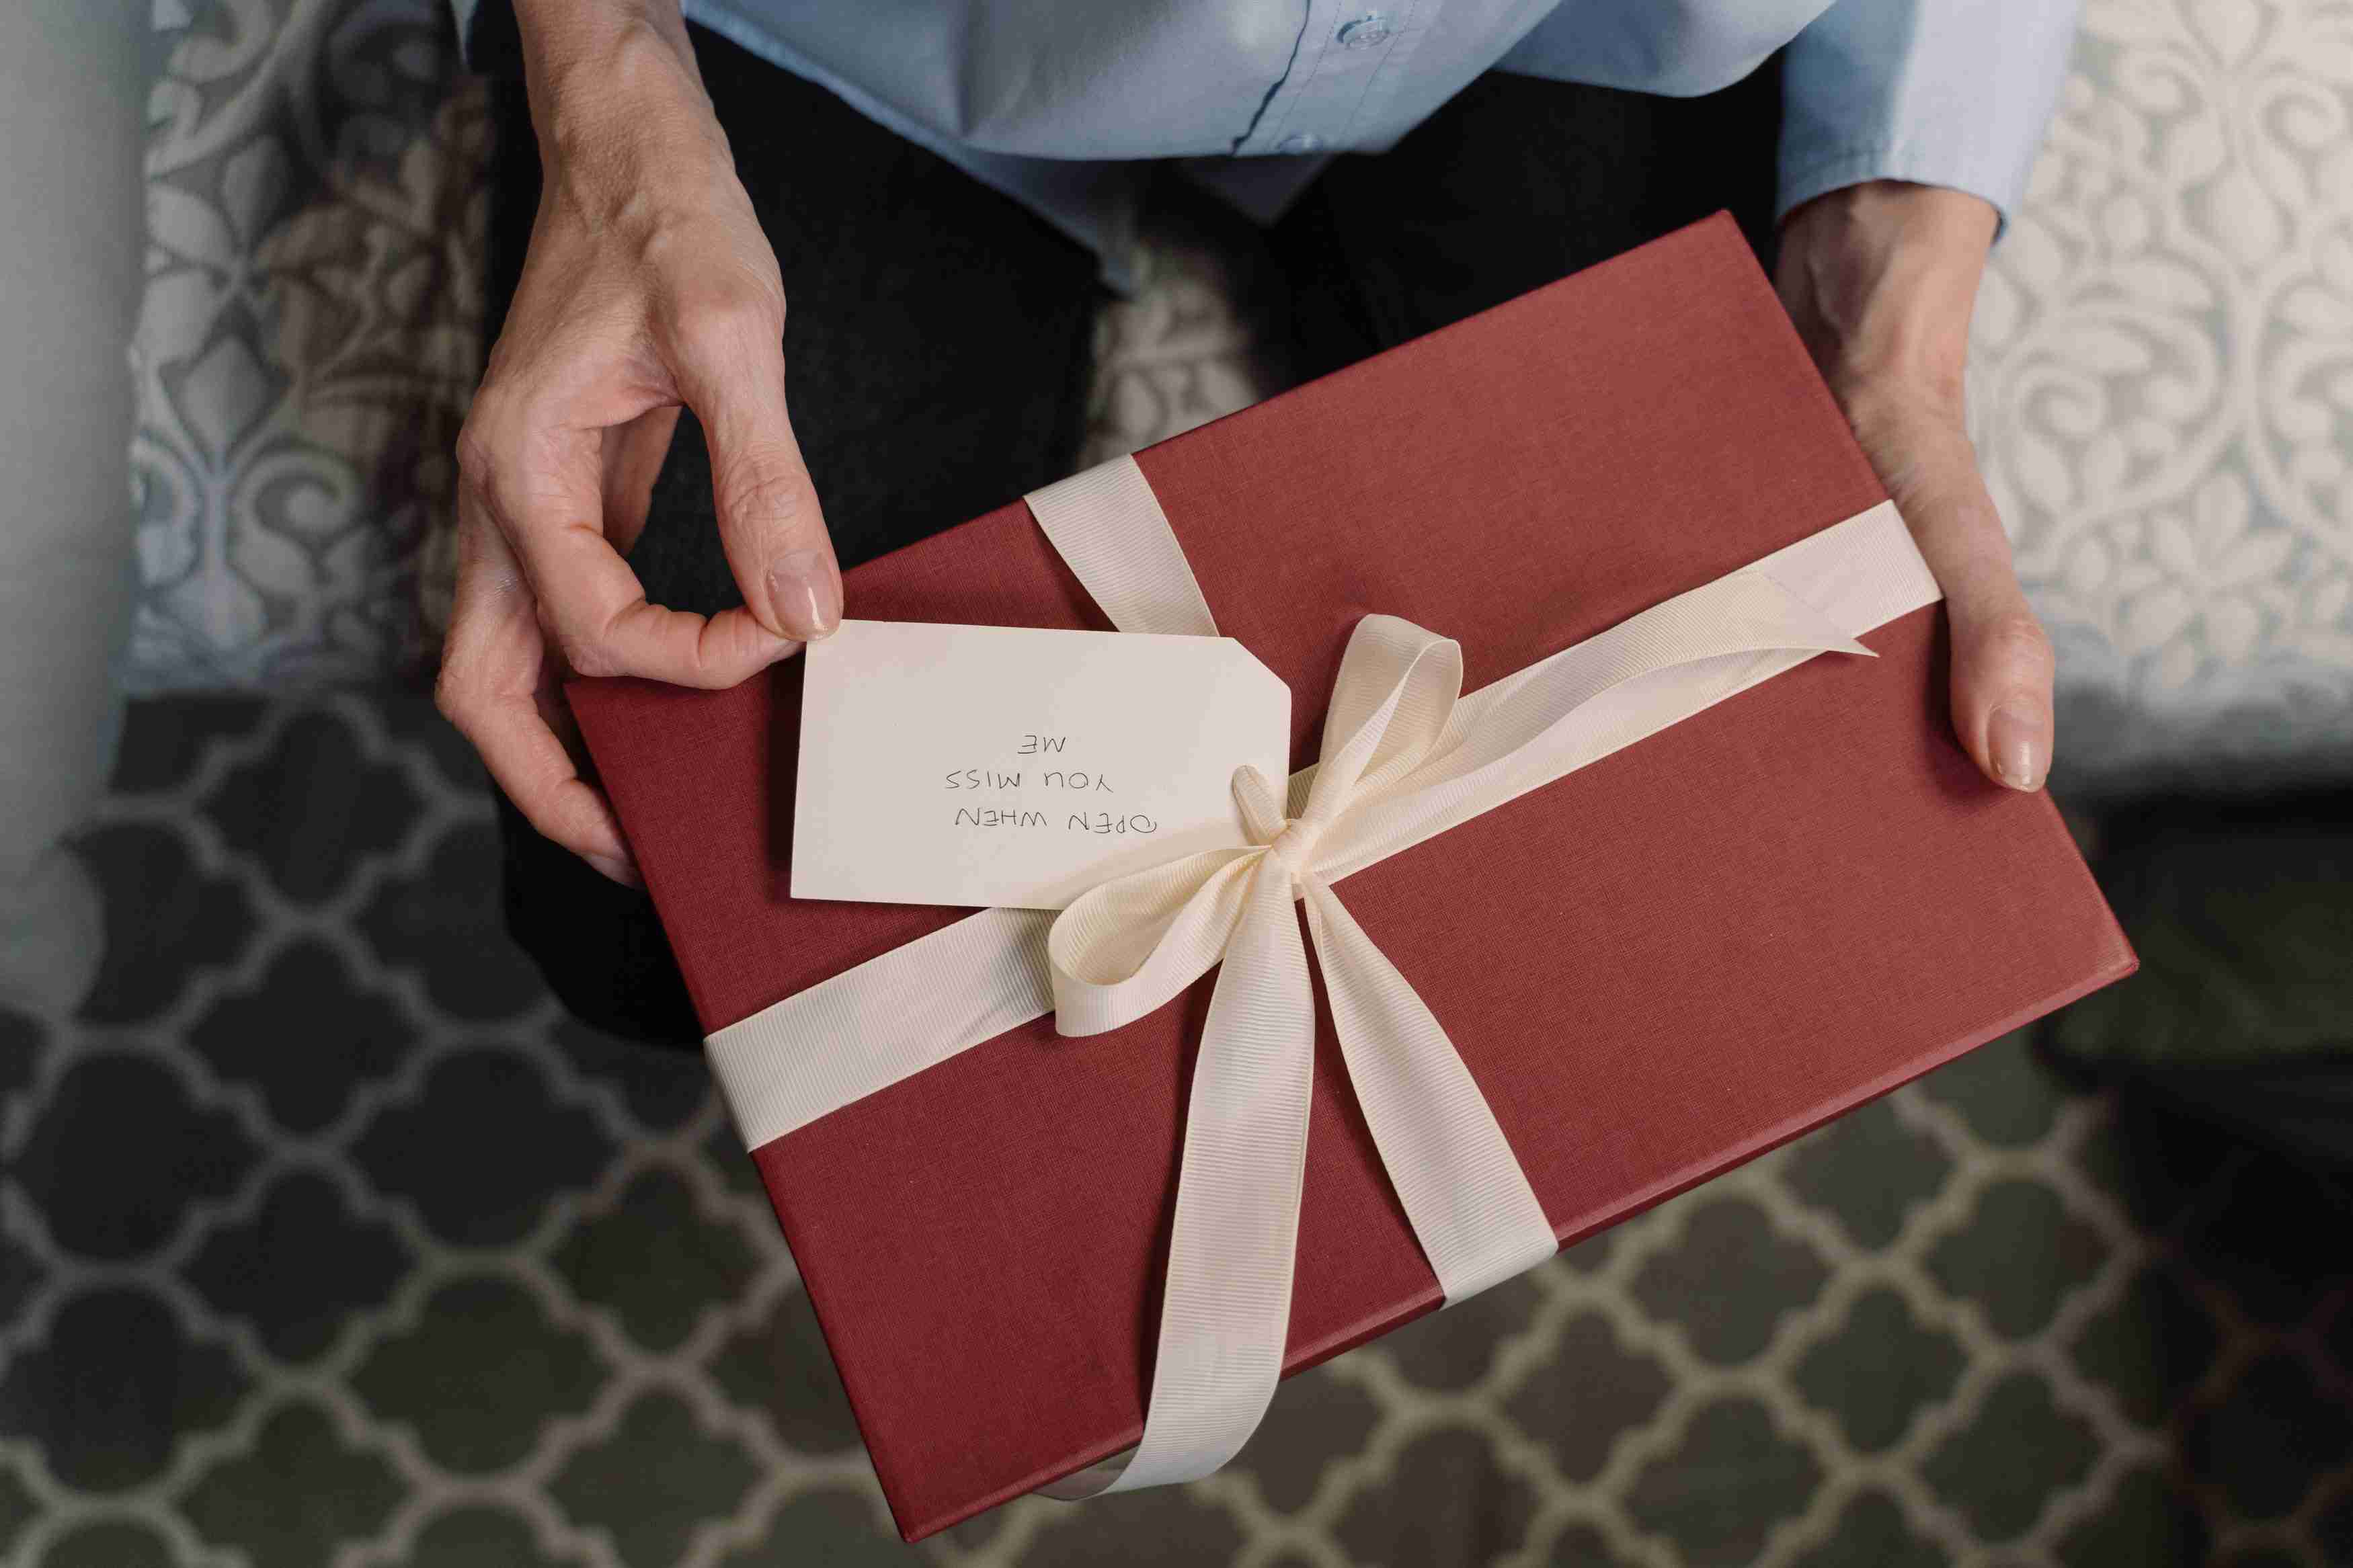 Gifts are always going to be special, and surprise gift boxes makes it even more special